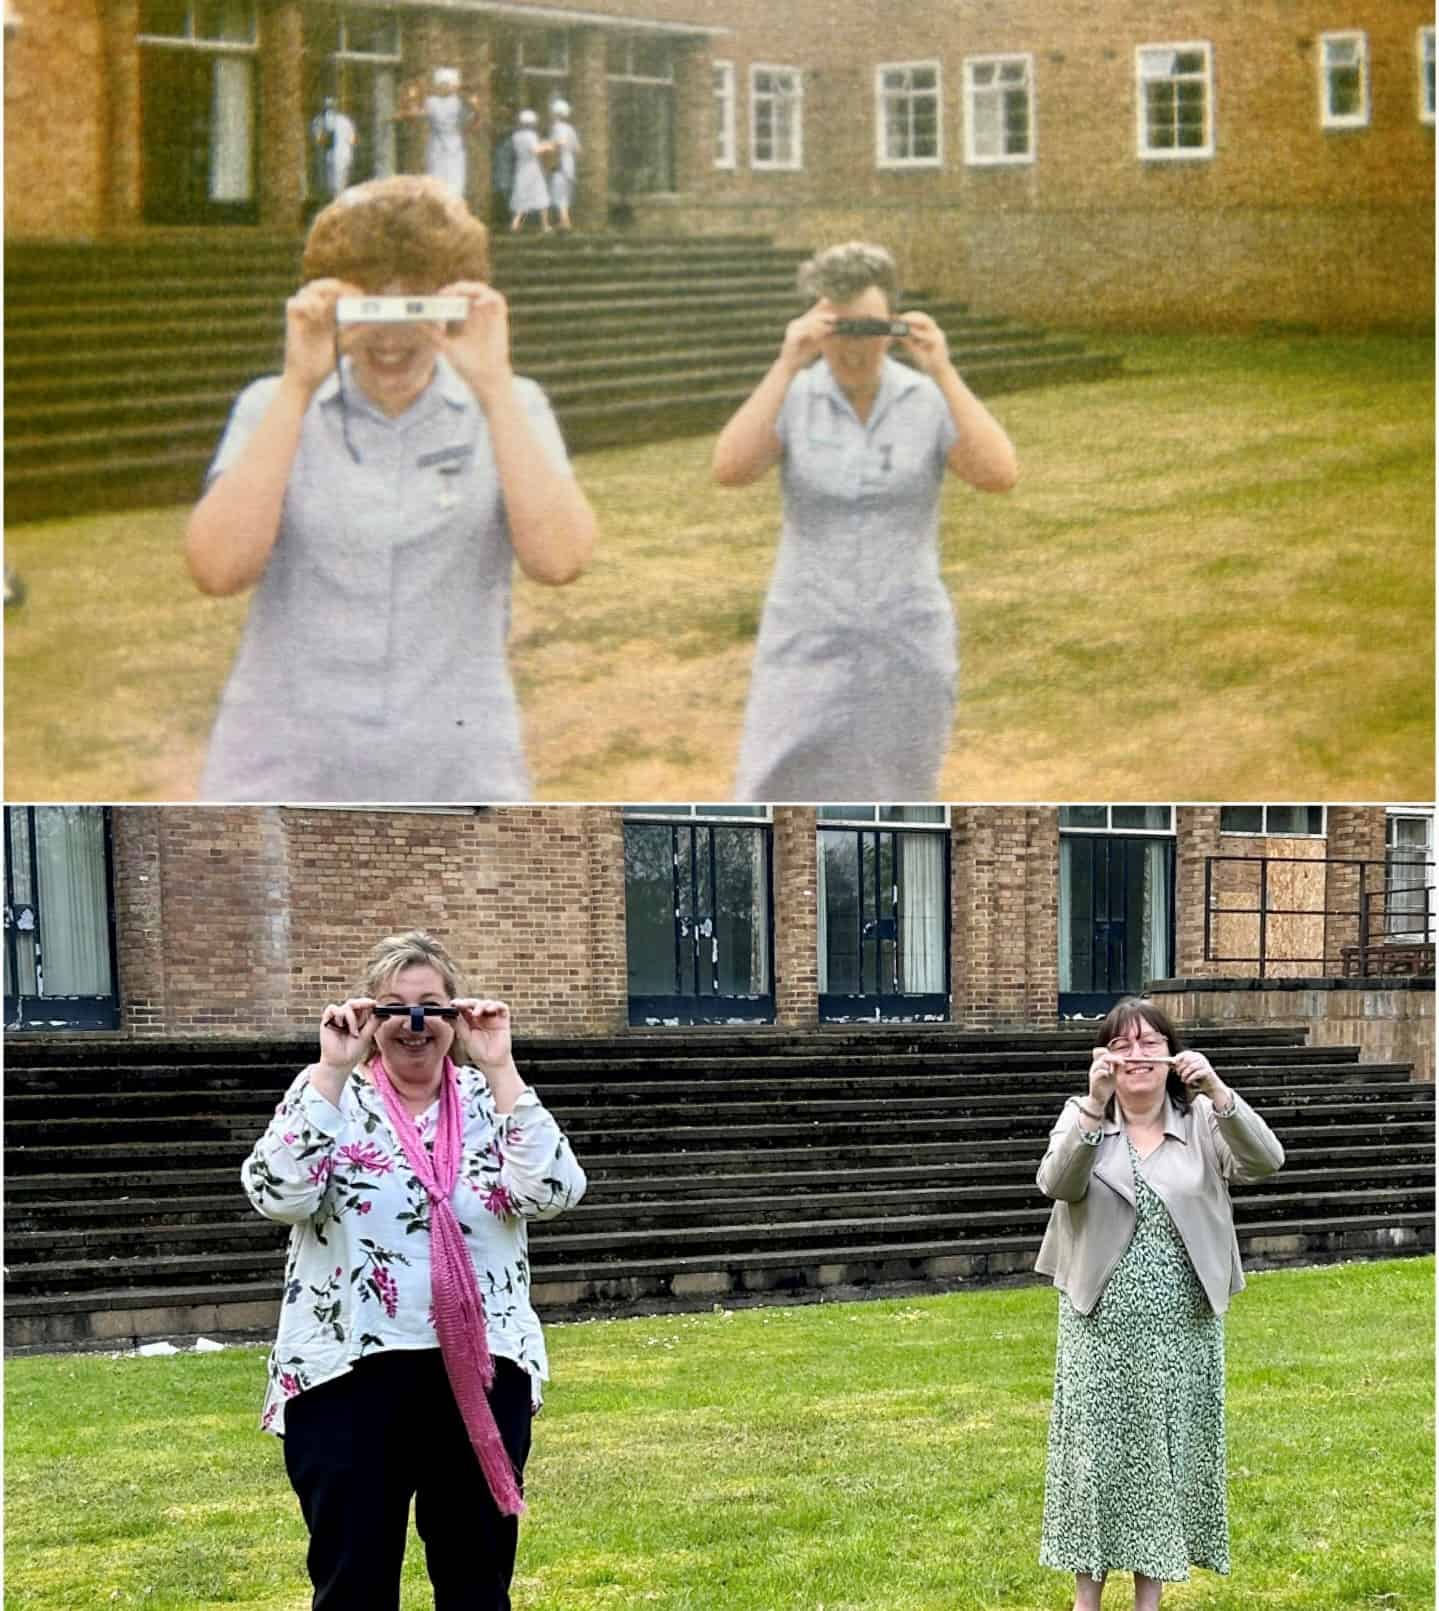 This photo shows Alison and Karen re-enacting a photo of themselves that was taken in the 1980s where they are holding cameras.